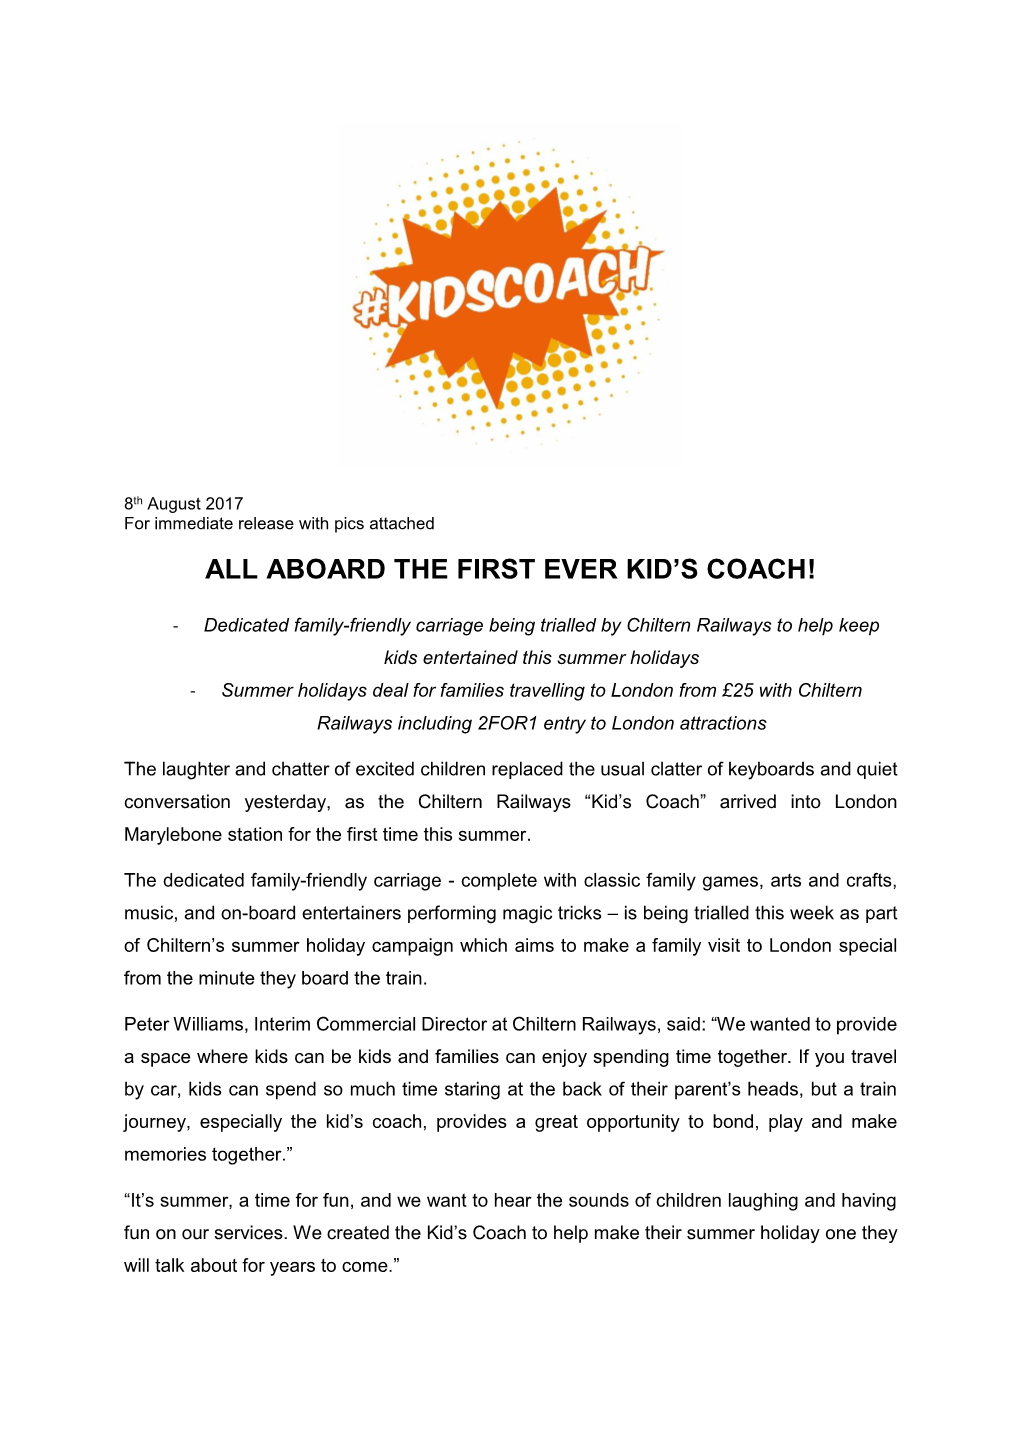 Aboard the First Ever Kid's Coach!